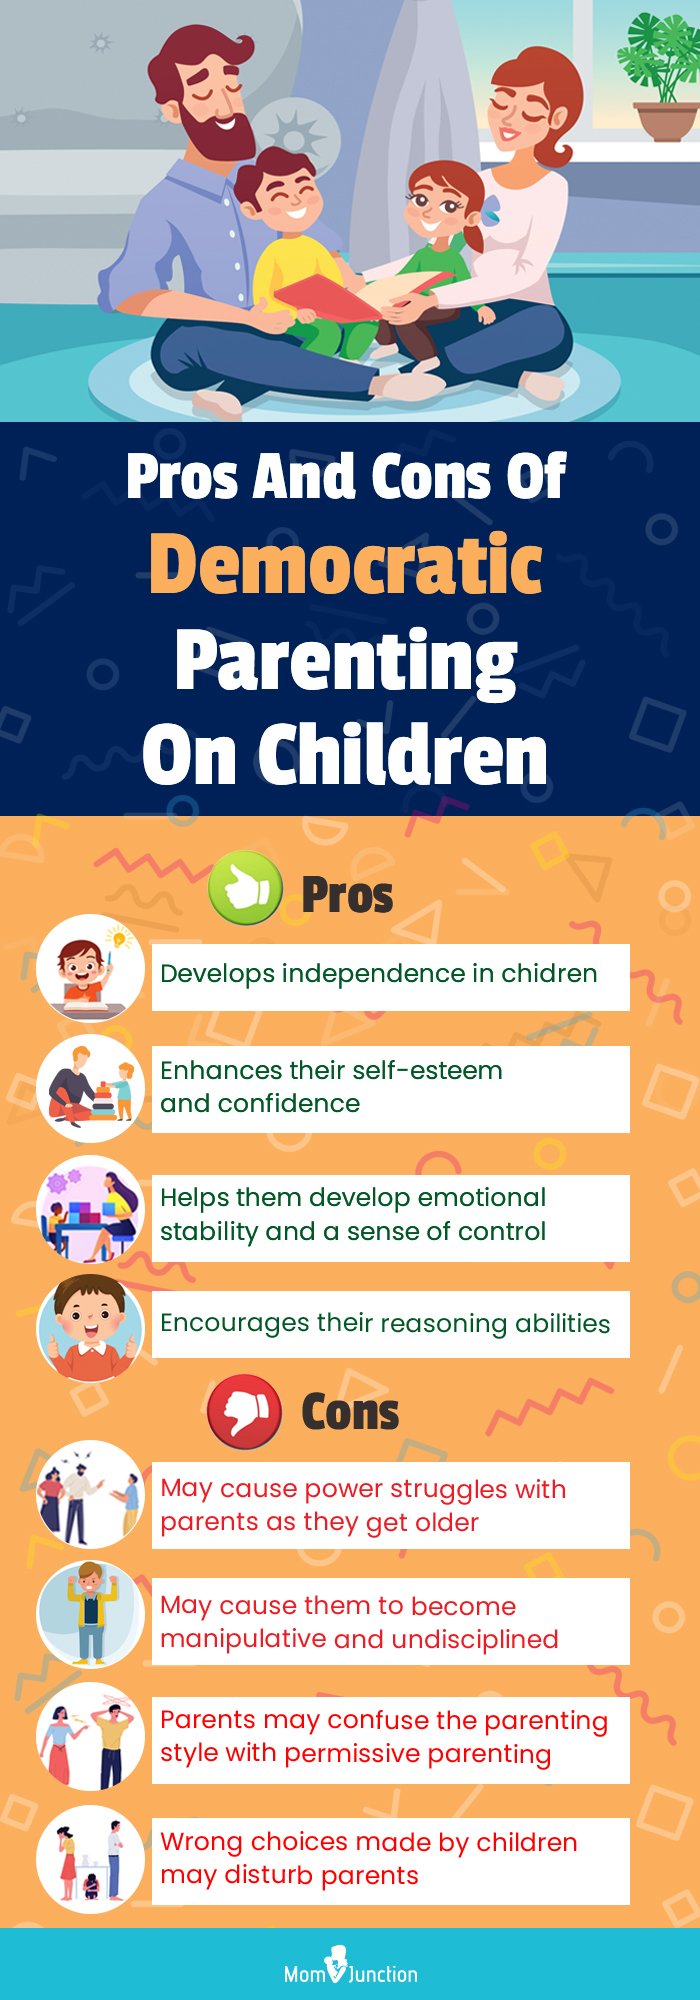 pro and cons of democratic parenting on children [infographic]